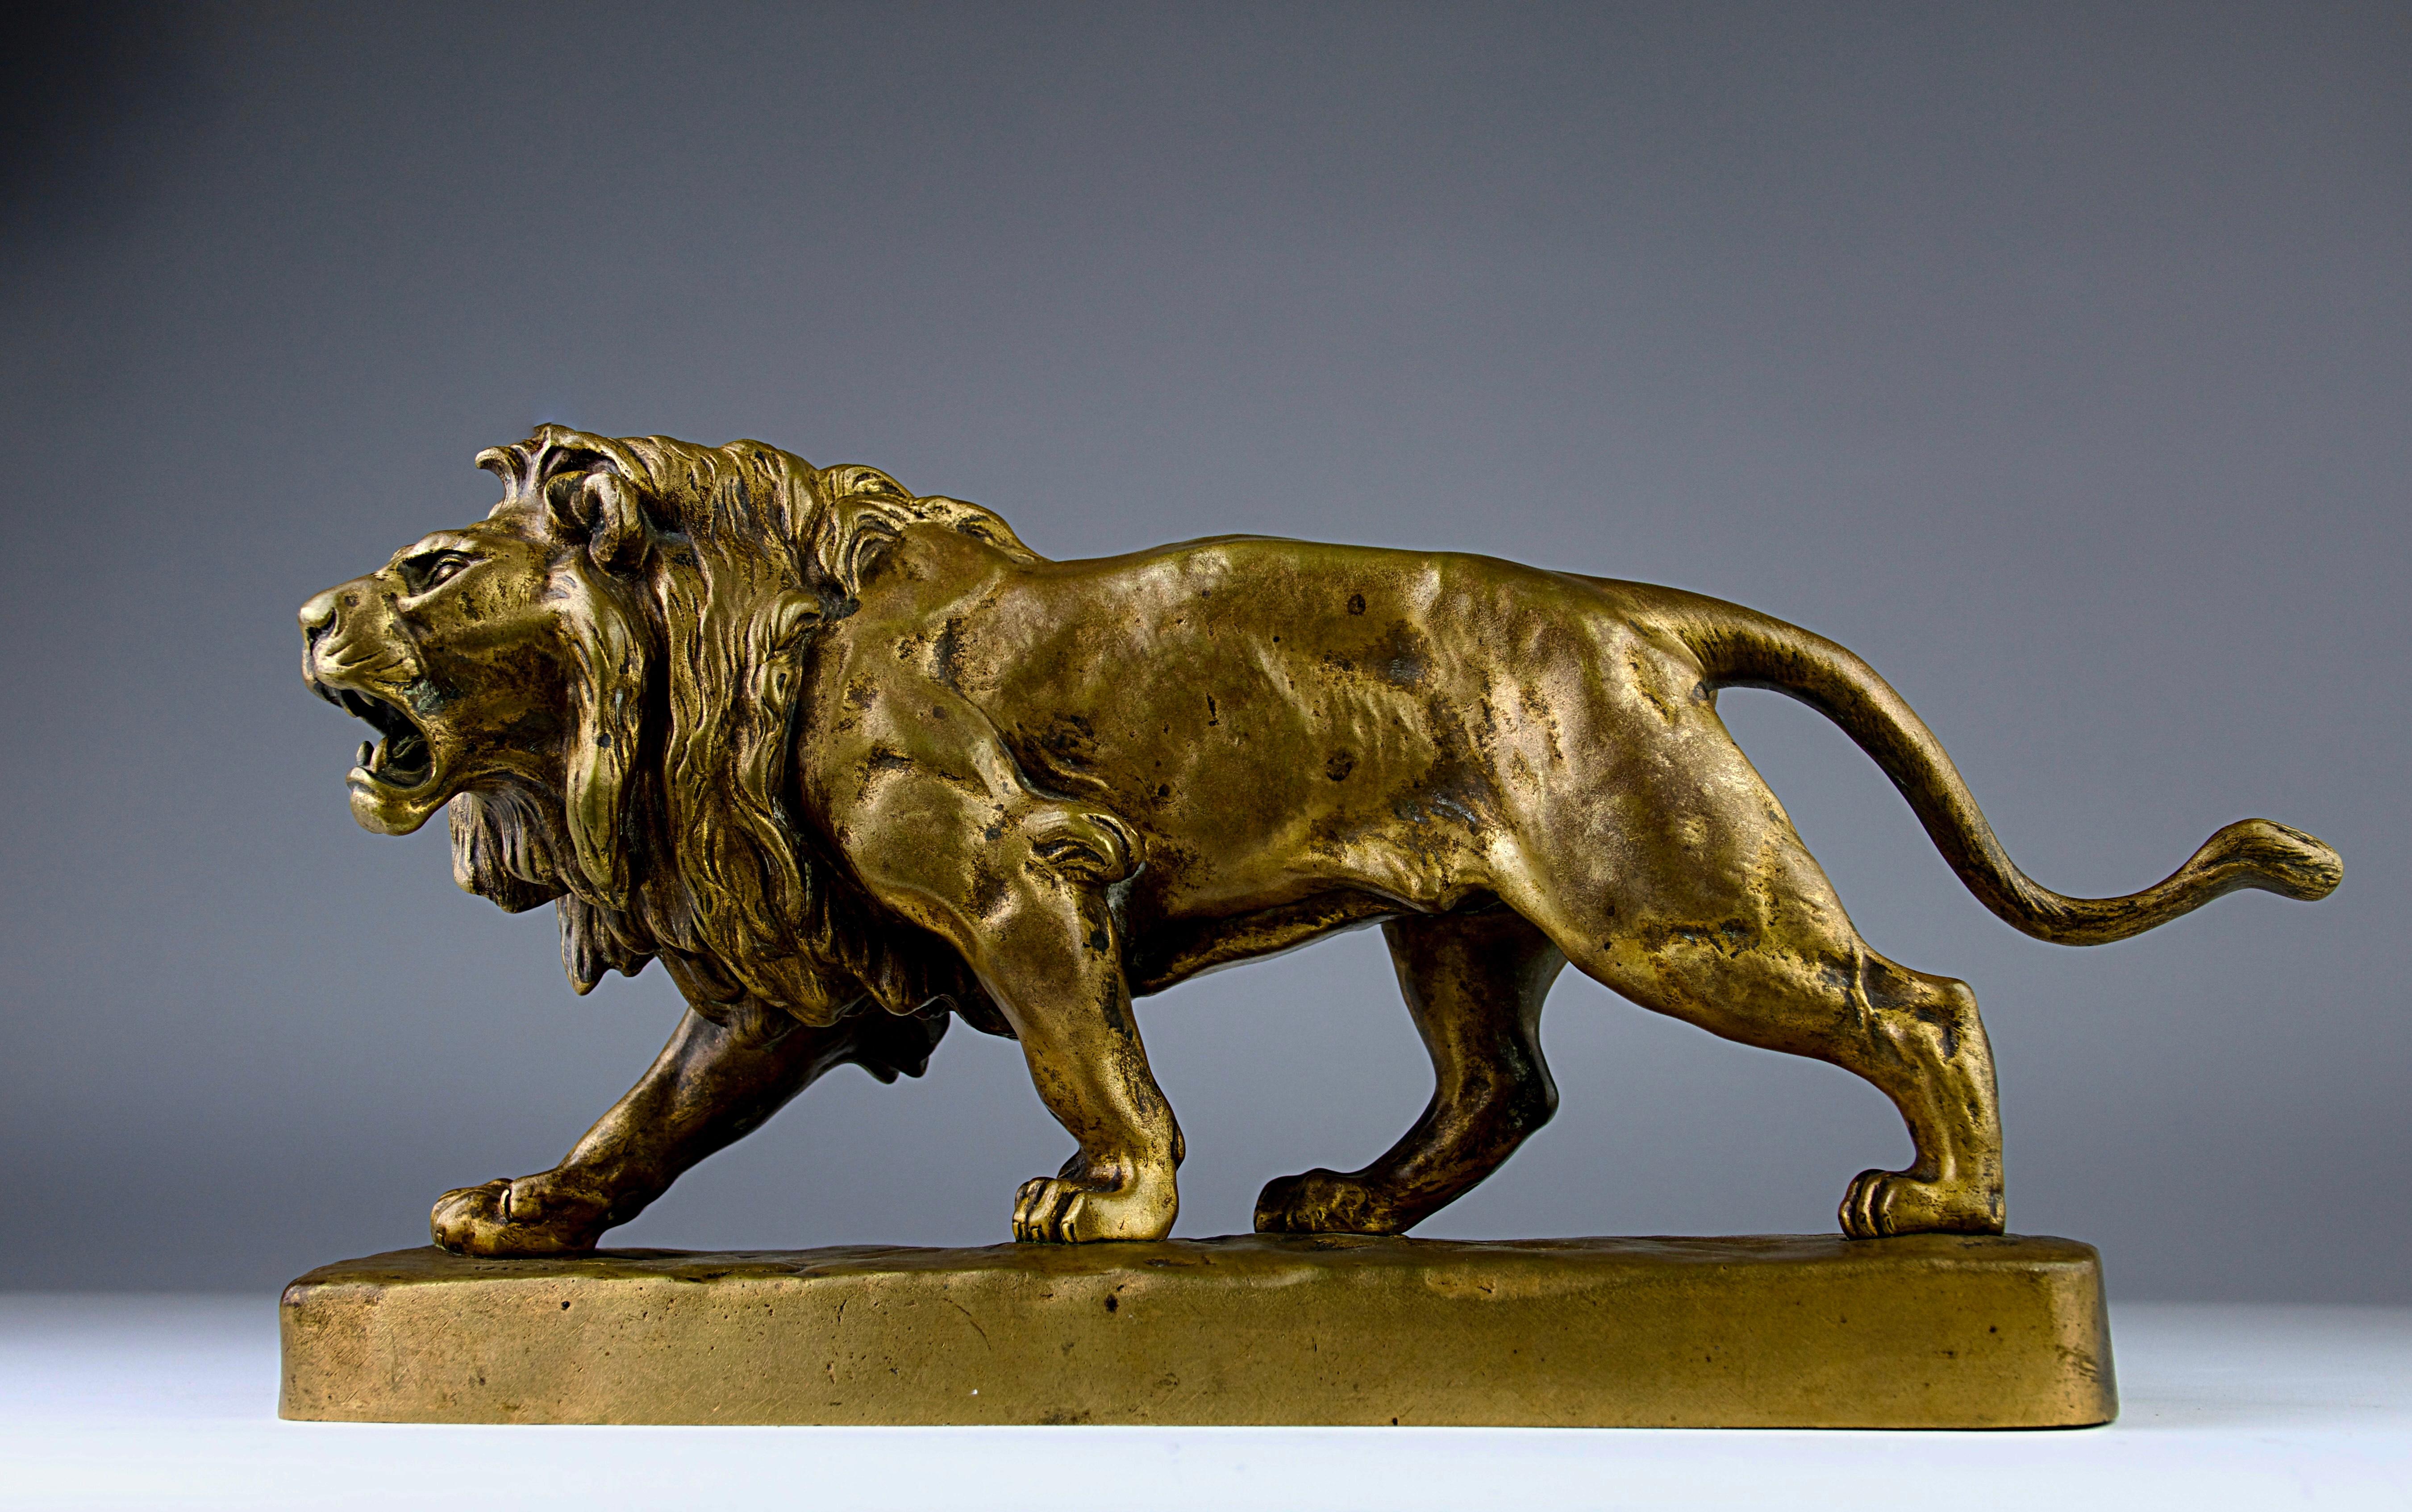 Beautiful roaring lion in gold patinated bronze by the artist and sculptor Louis Vidal (1831-1892) of the Romantic period, France 19th century. 

Dimensions in cm ( H x L x l ) : 17 x 36 x 9

Secure shipping.

Louis Vidal, Vidal the blind or